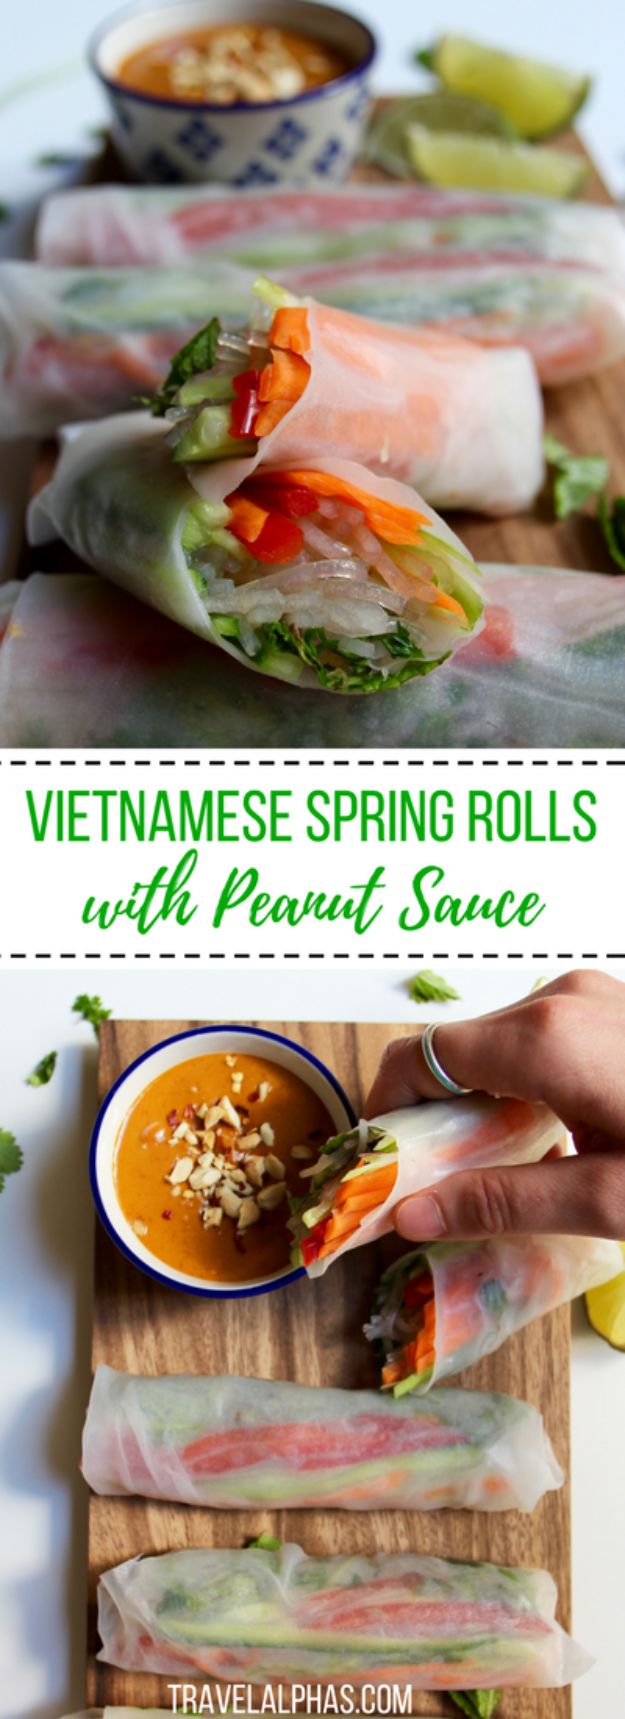 Gluten Free Appetizers - Vietnamese Spring Rolls With Peanut Sauce - Easy Flourless and Glutenfree Snacks, Wraps, Finger Foods and Snack Recipes - Recipe Ideas for Gluten Free Diets #glutenfree 